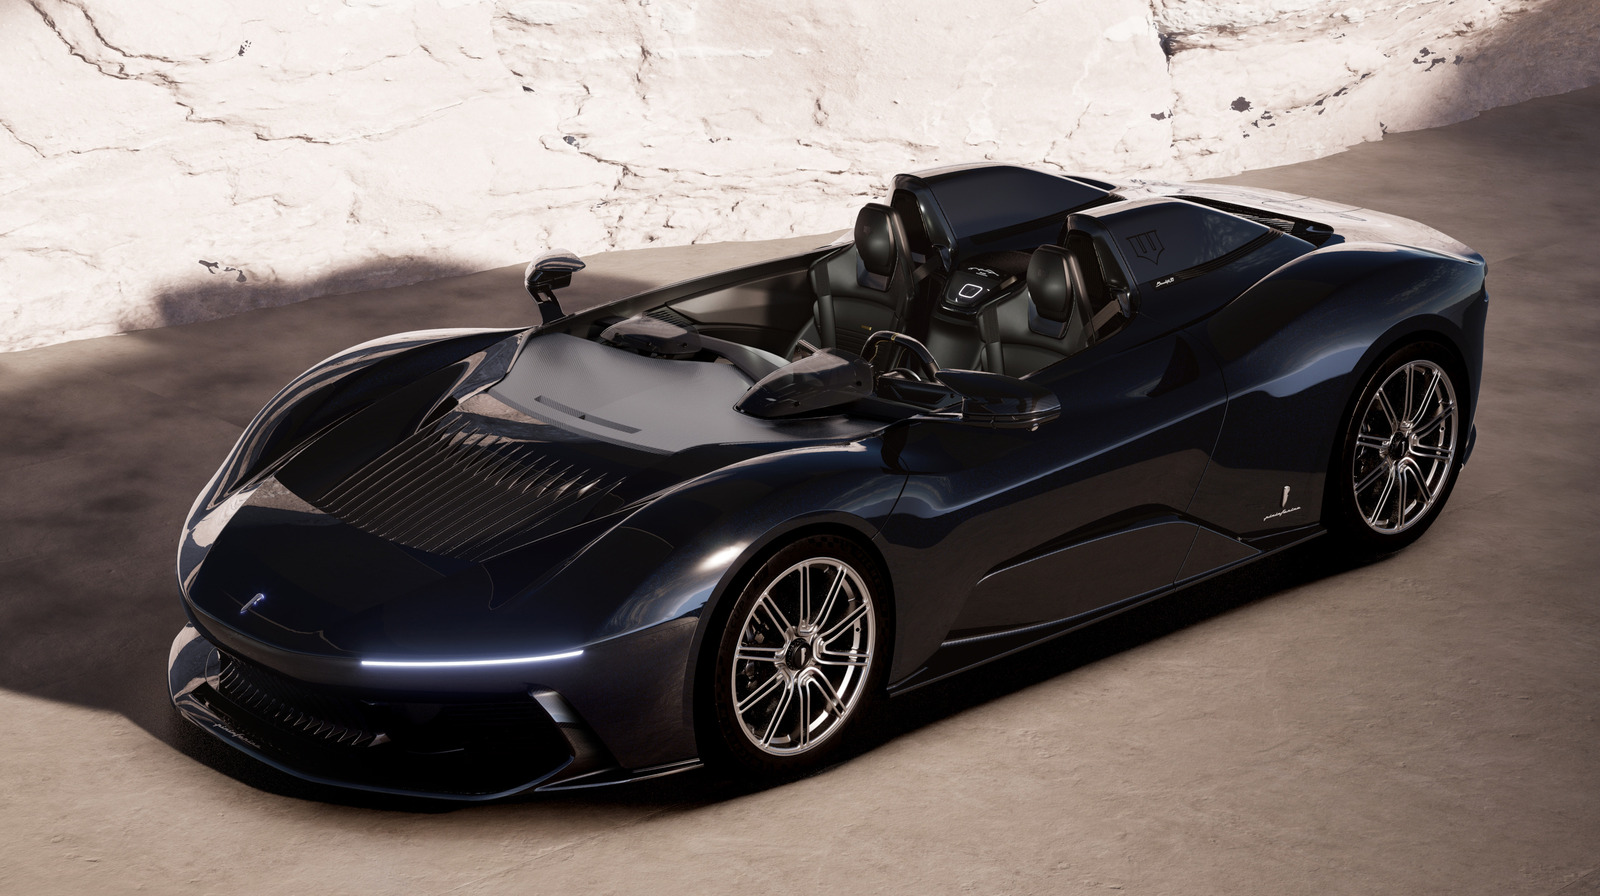 Are These The $5.2 Million Electric Hypercars Fit For Bruce Wayne?